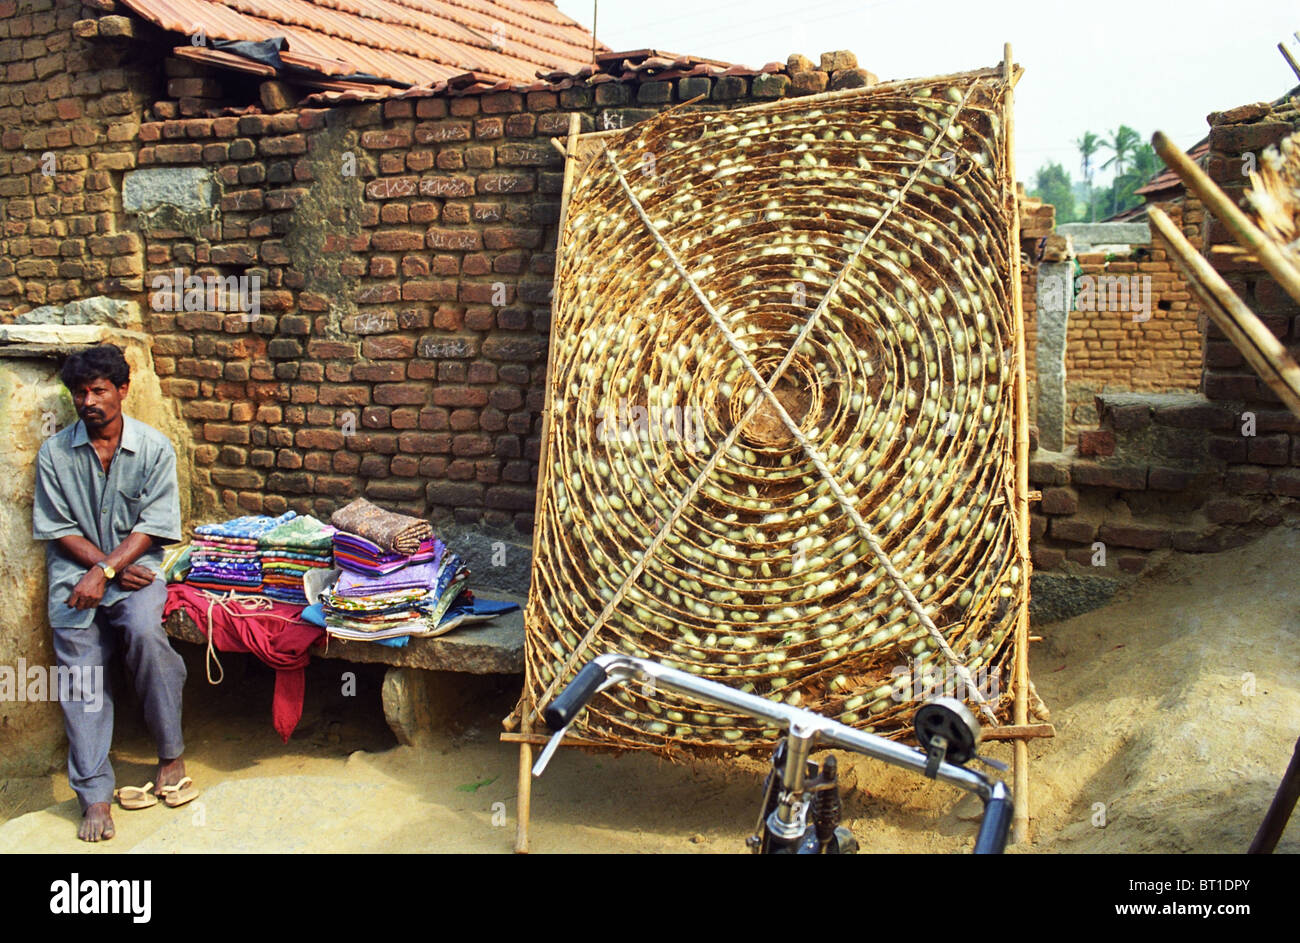 Silk worm cocoons in a small village in south India. Stock Photo